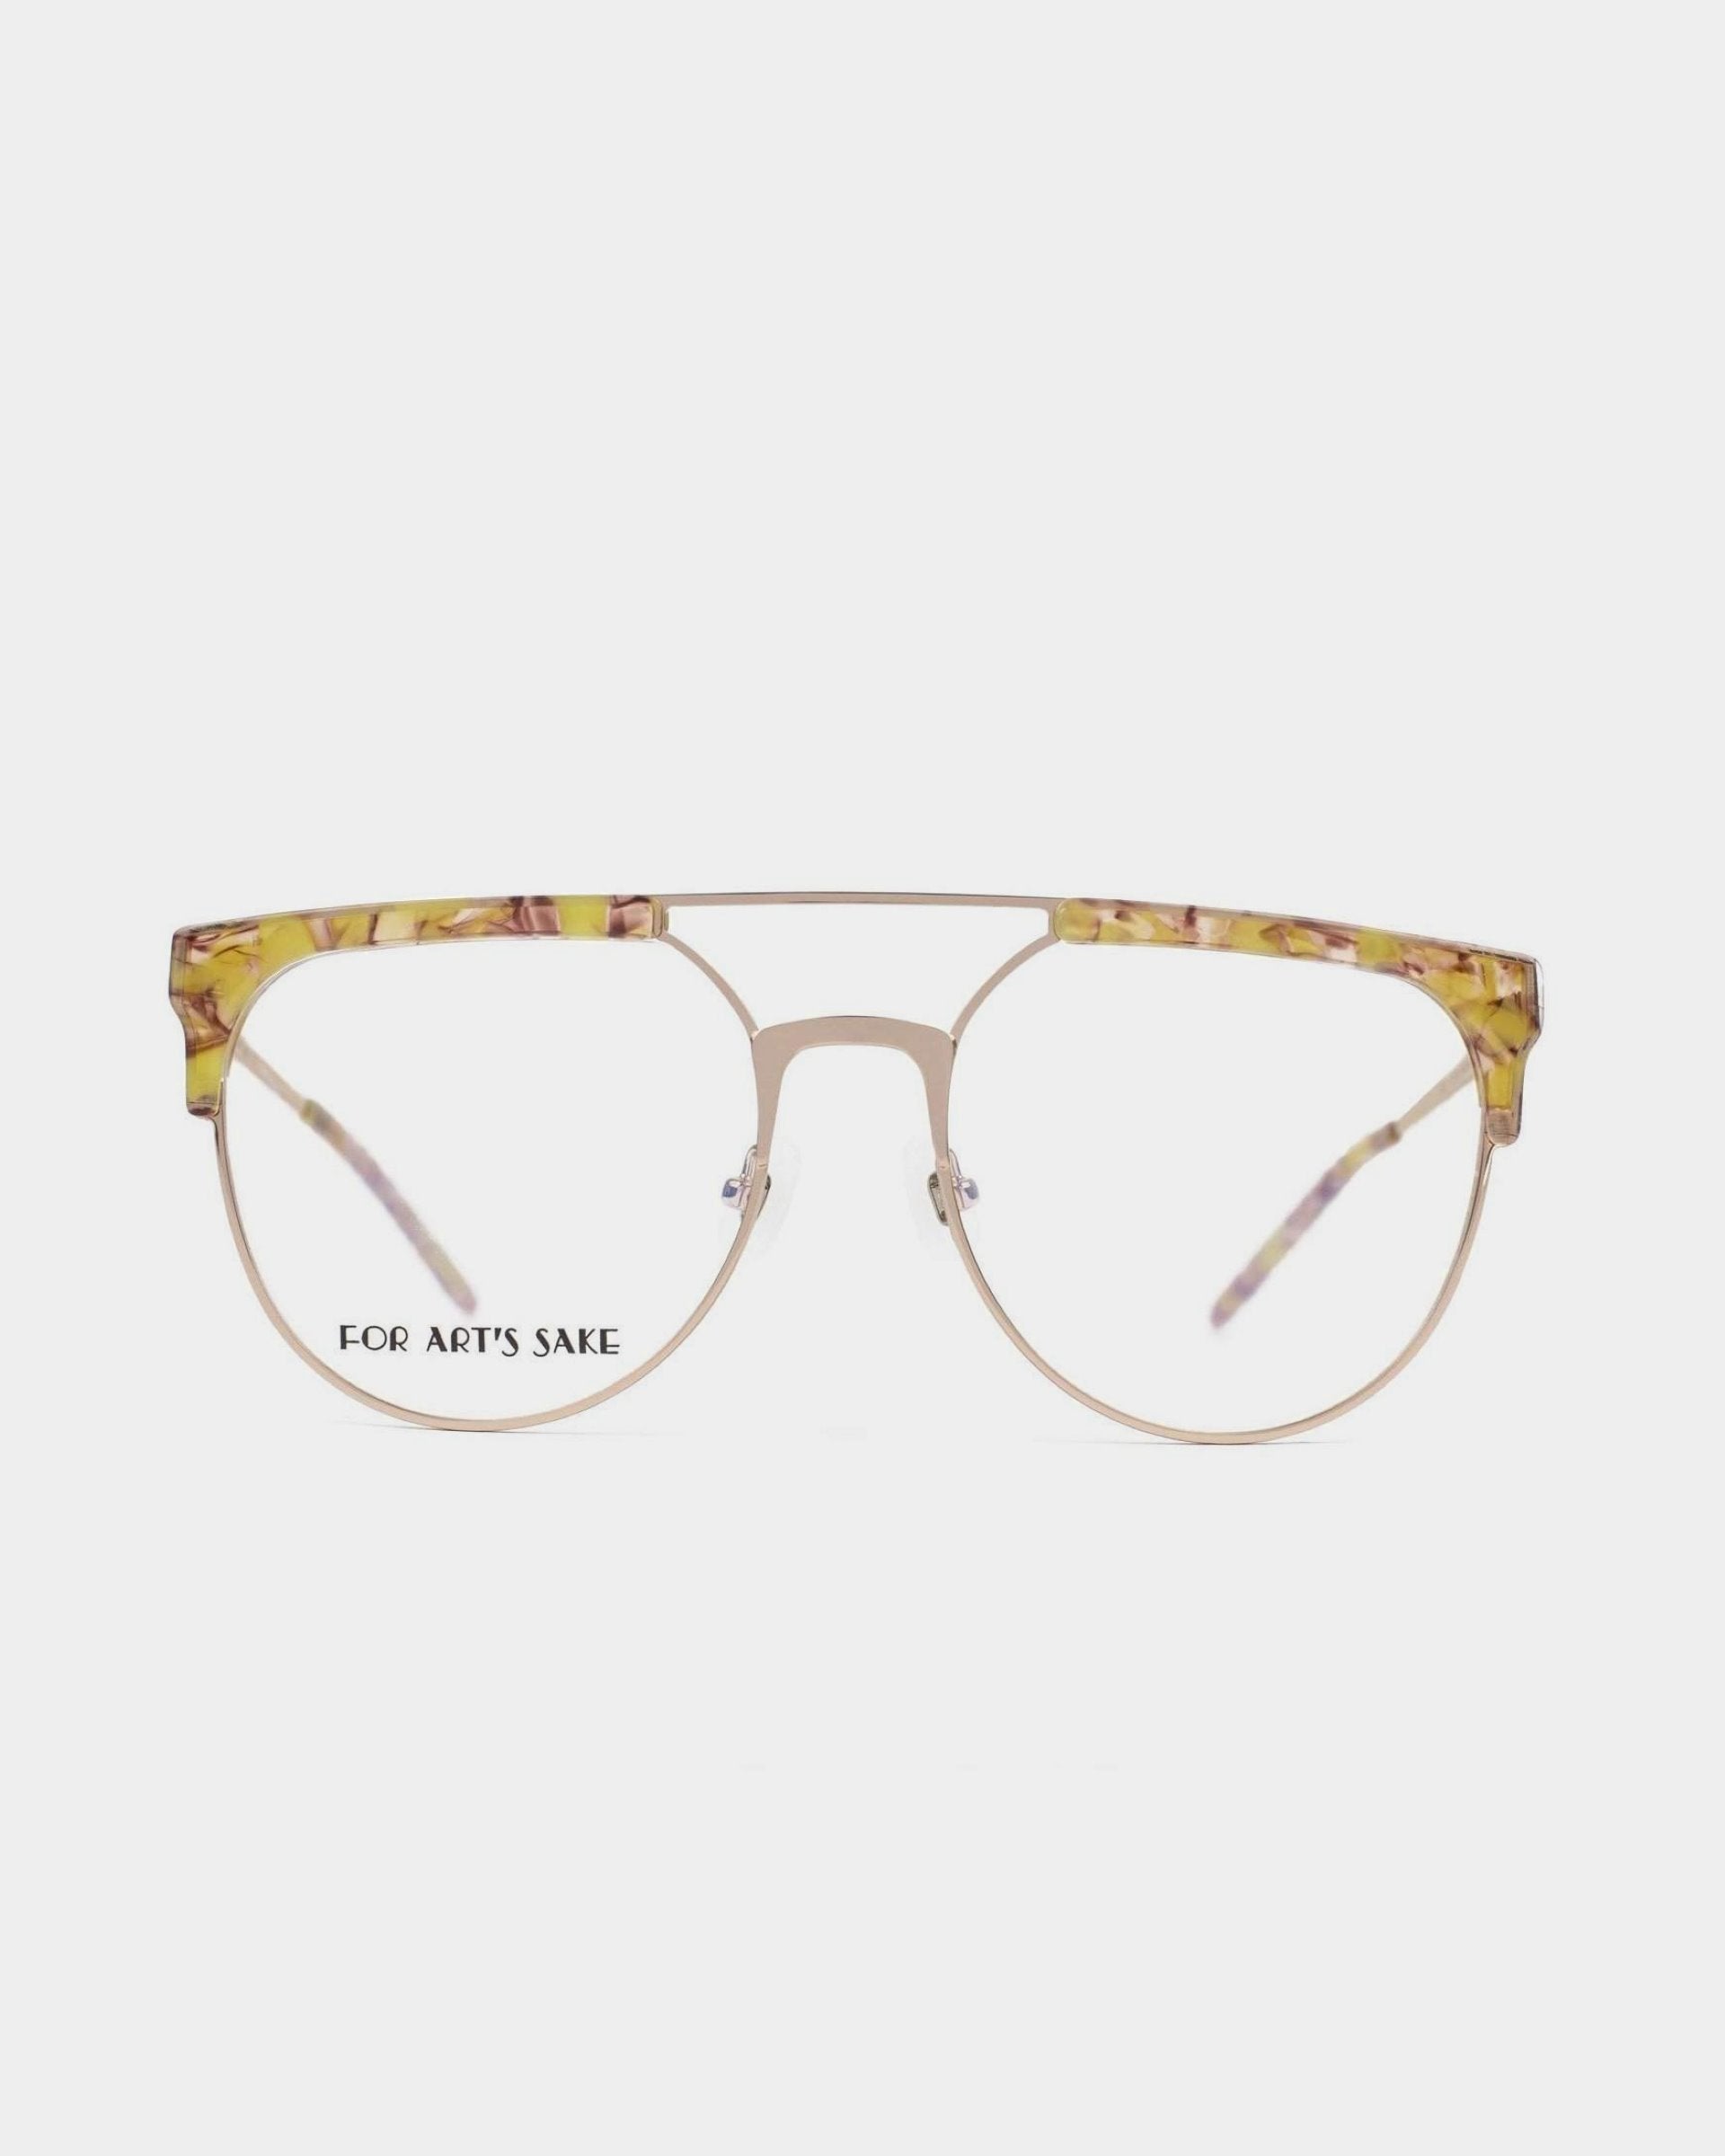 A pair of For Art's Sake® "Frosty" prescription glasses with a thin, gold metal frame and tortoise shell-patterned accents on the top part of the rims. The lenses are clear, with the left lens displaying "FOR ART'S SAKE." These chic glasses are also equipped with blue light filter technology. The background is plain white.